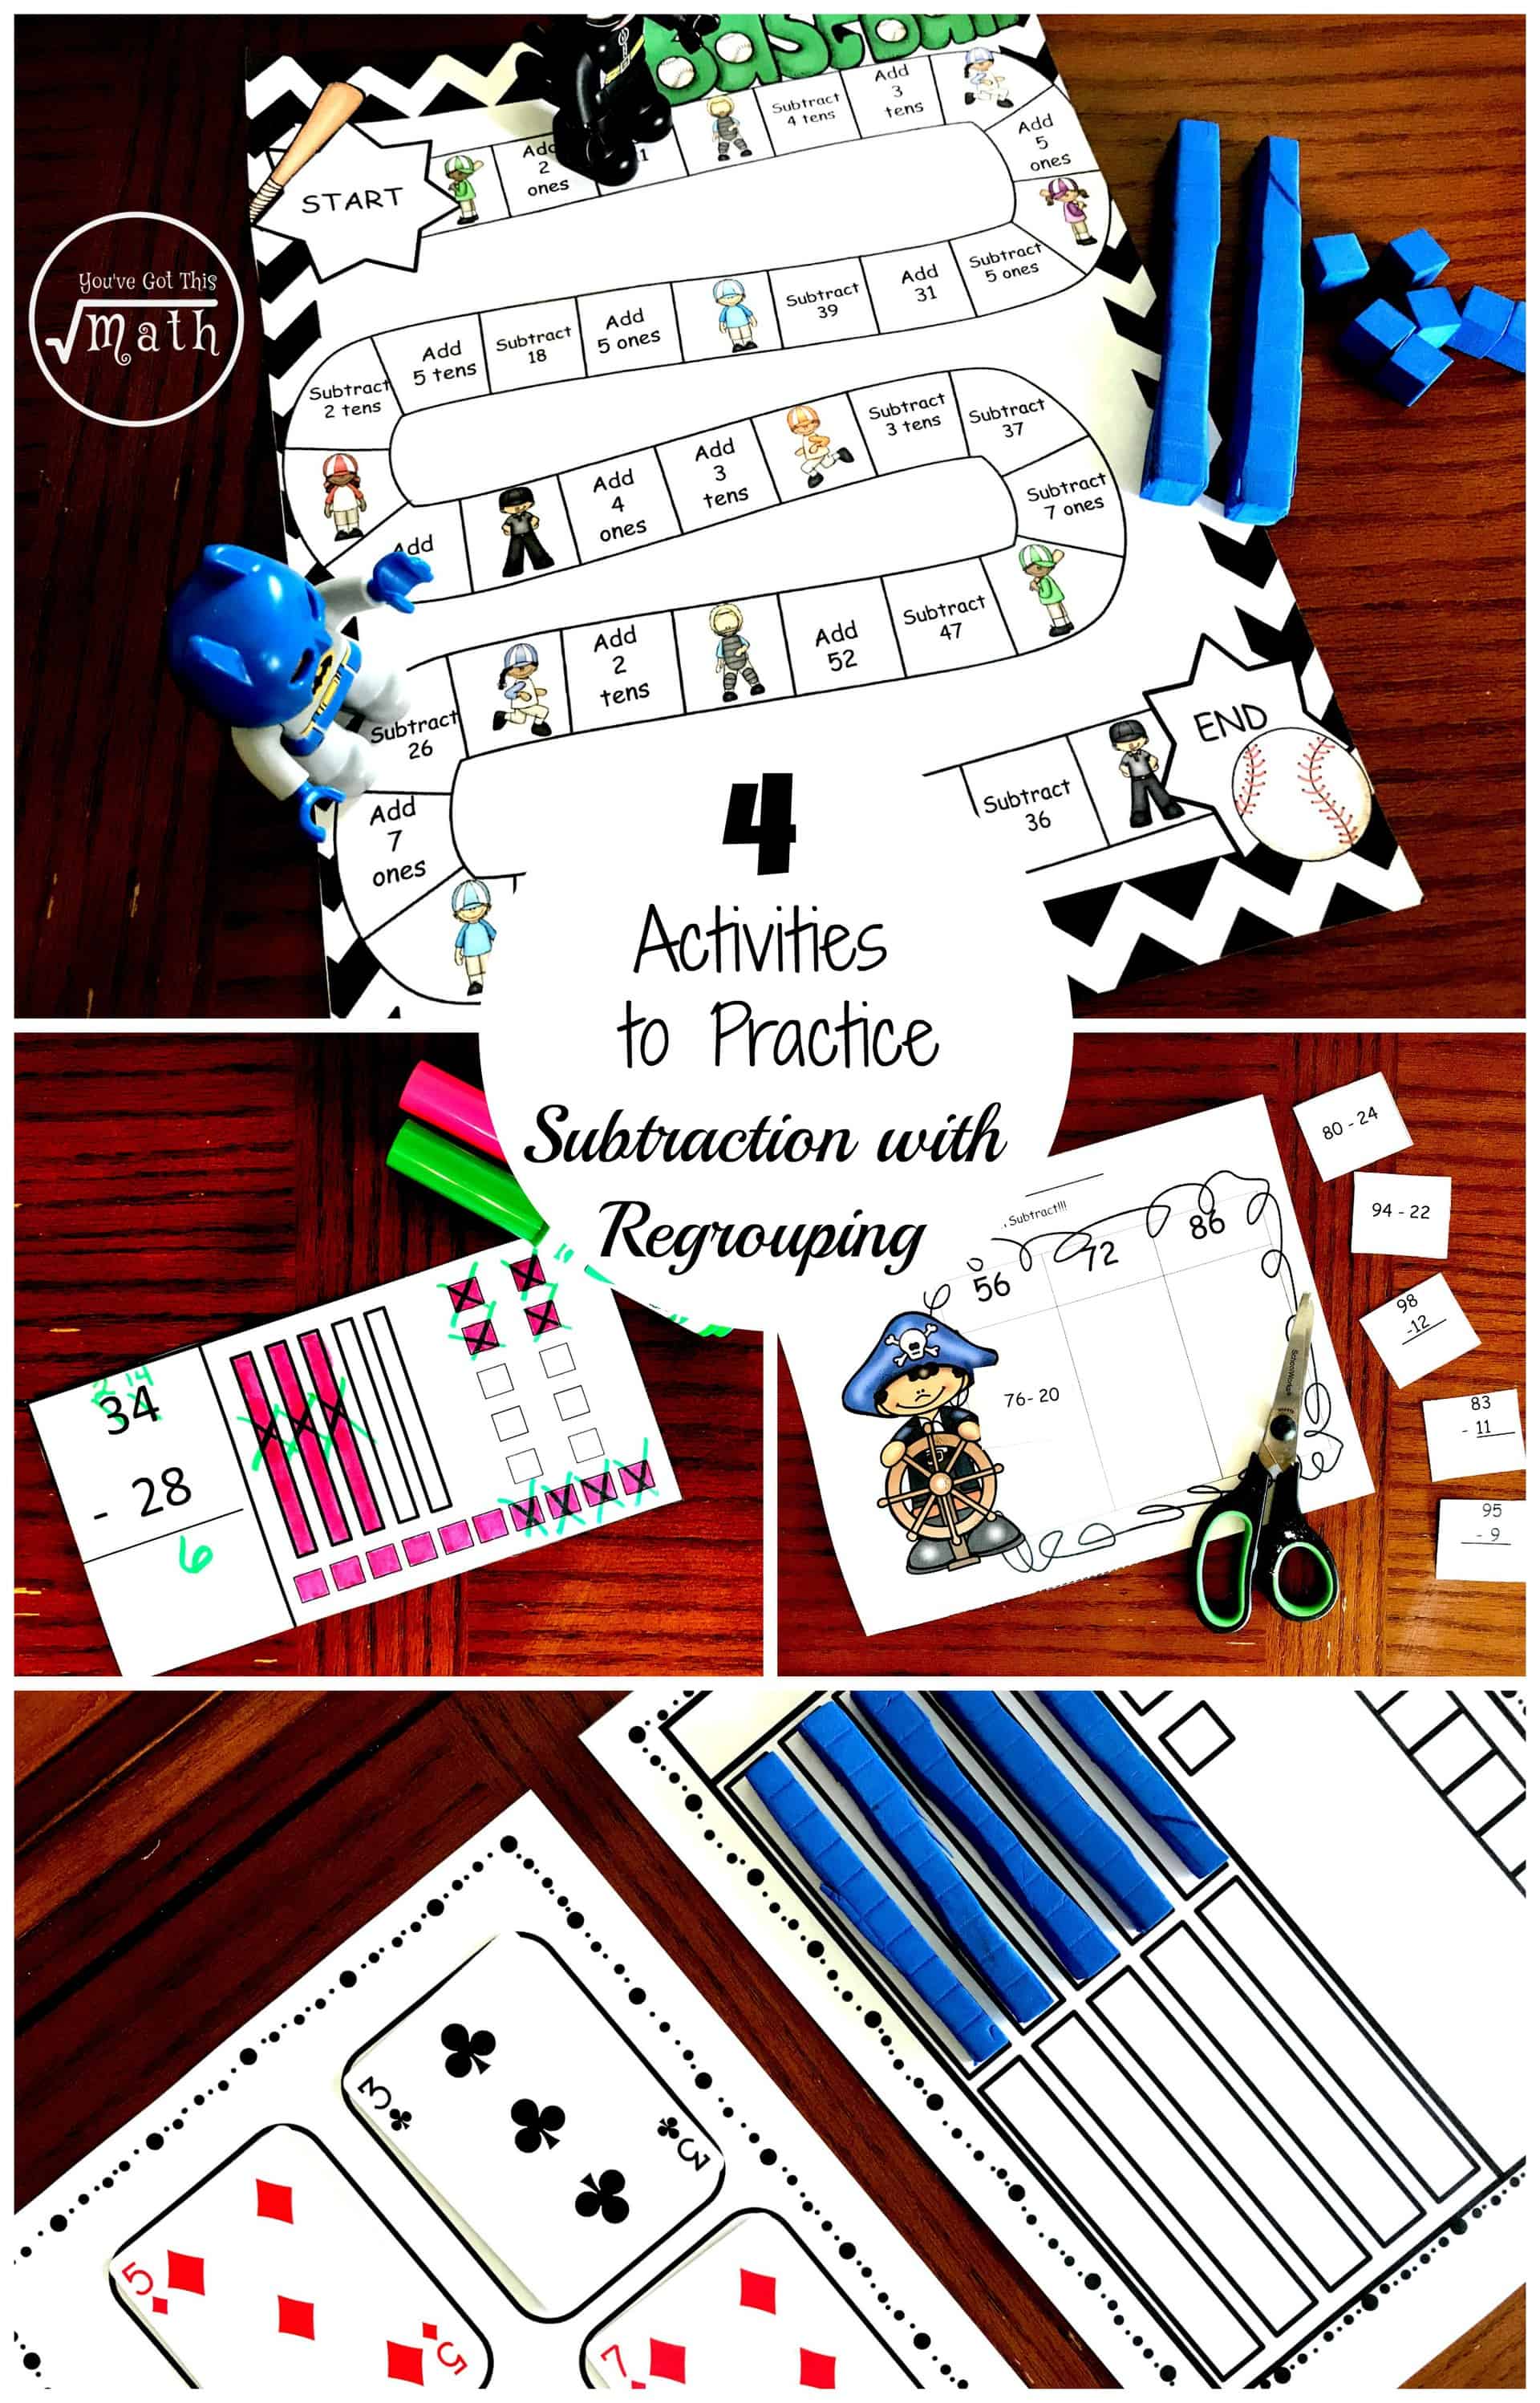 4 Activities to Practice Subtracting With Regrouping - You've Got This Math